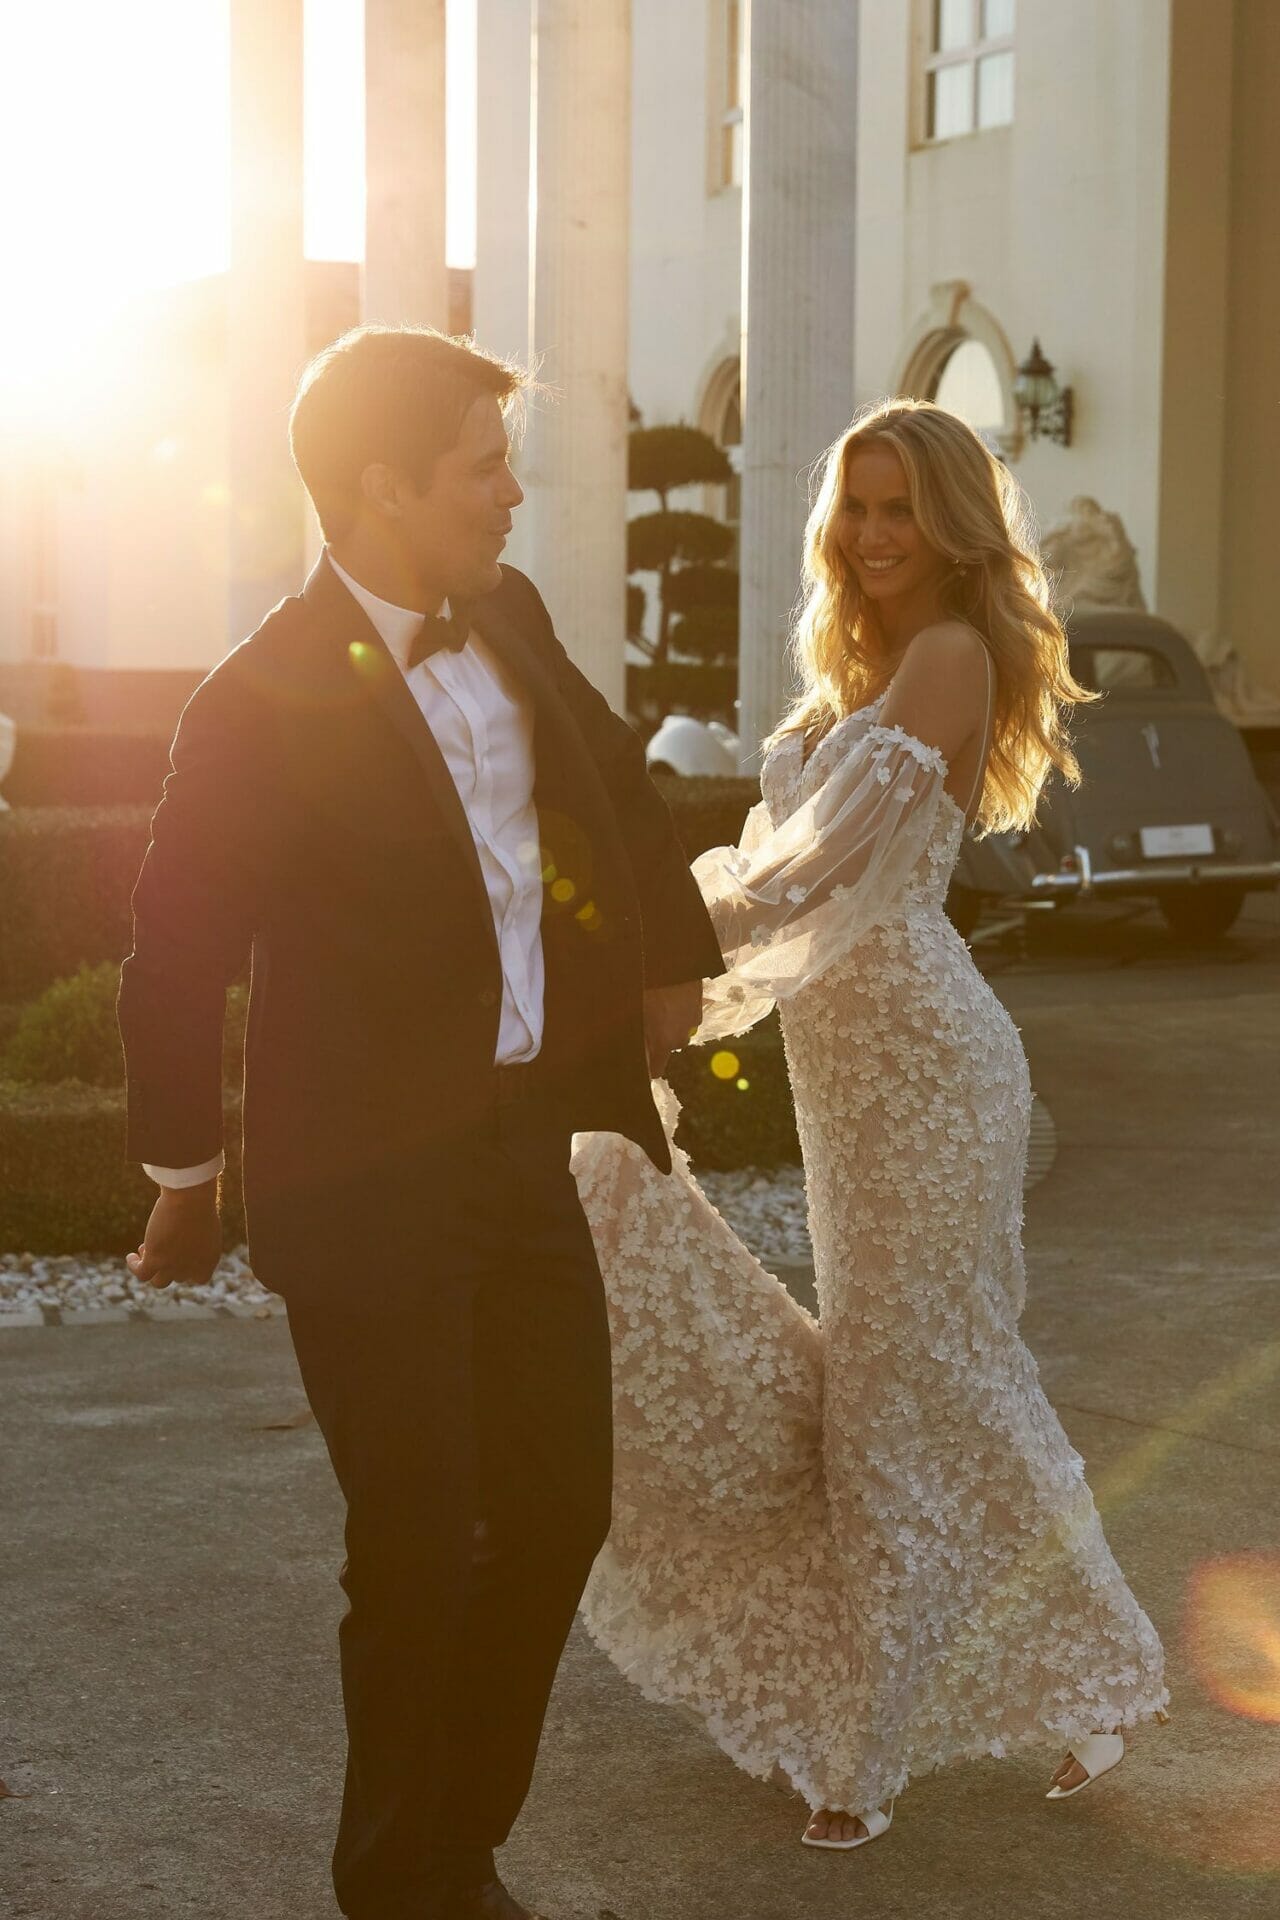 A bride and groom, dressed in wedding attire, walking in front of a building at sunset.